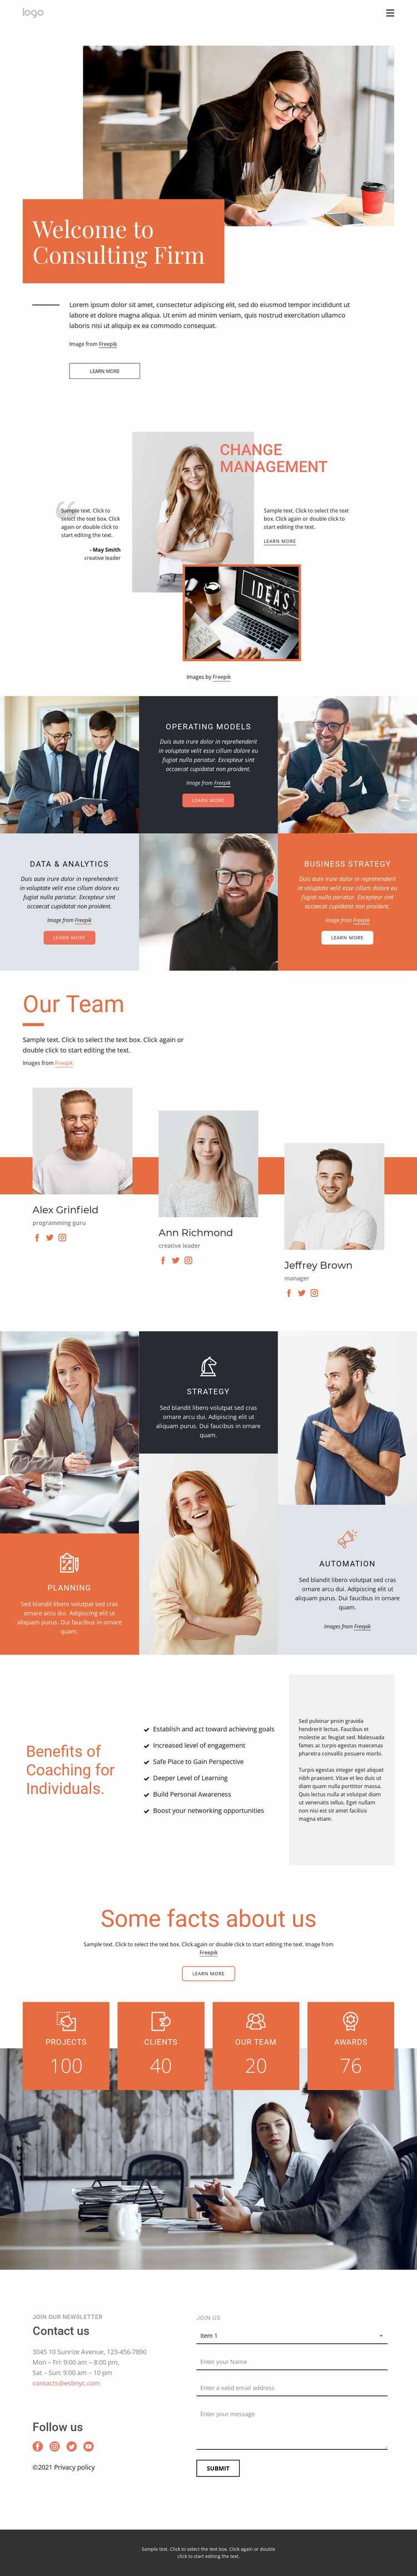 Consulting firm Website Mockup